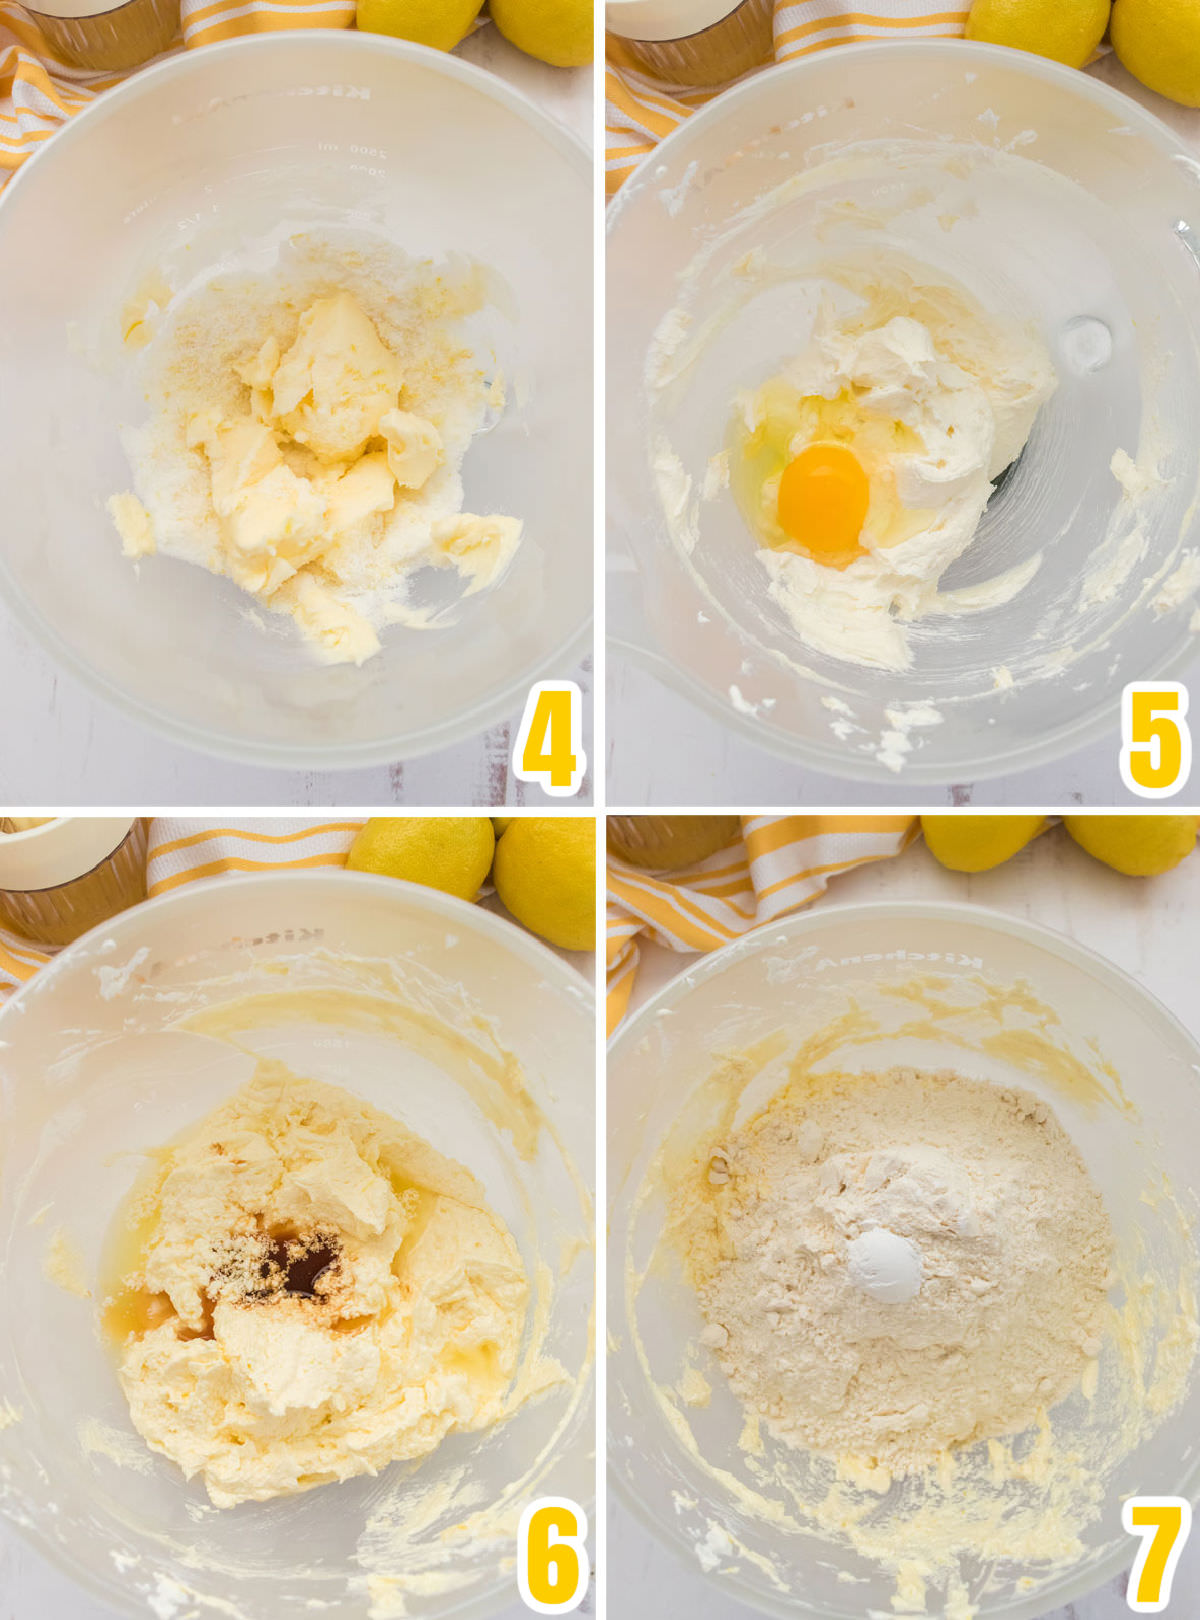 Collage image showing the steps for making the pound cake batter.